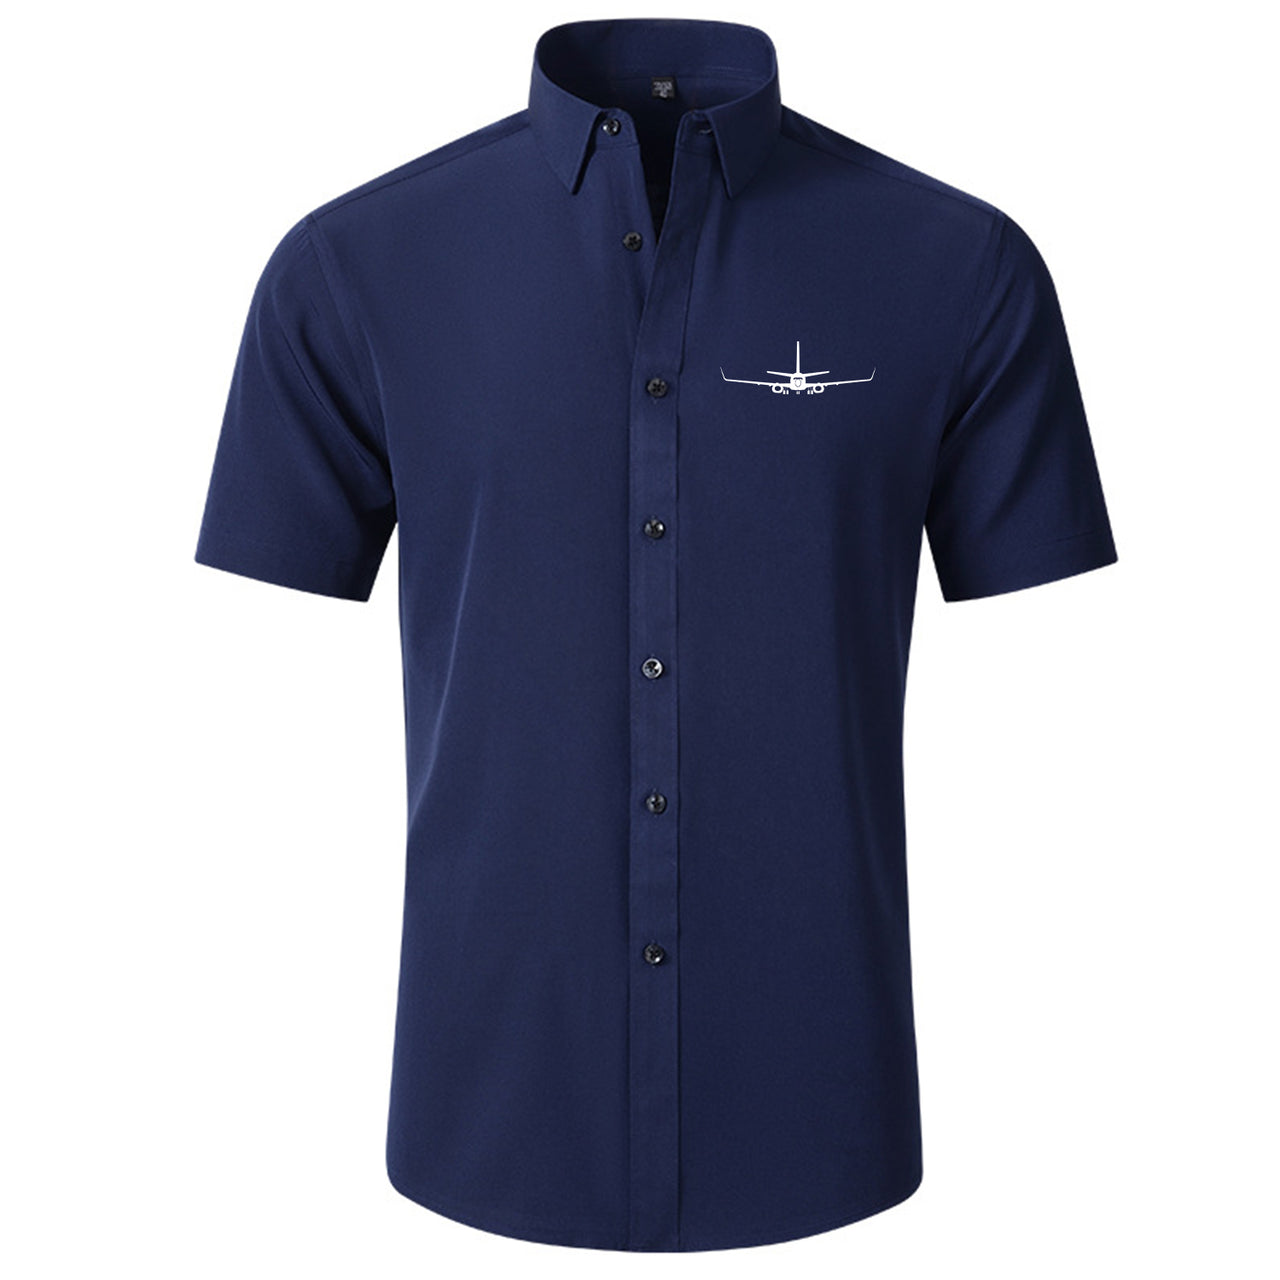 Boeing 737-800NG Silhouette Designed Short Sleeve Shirts